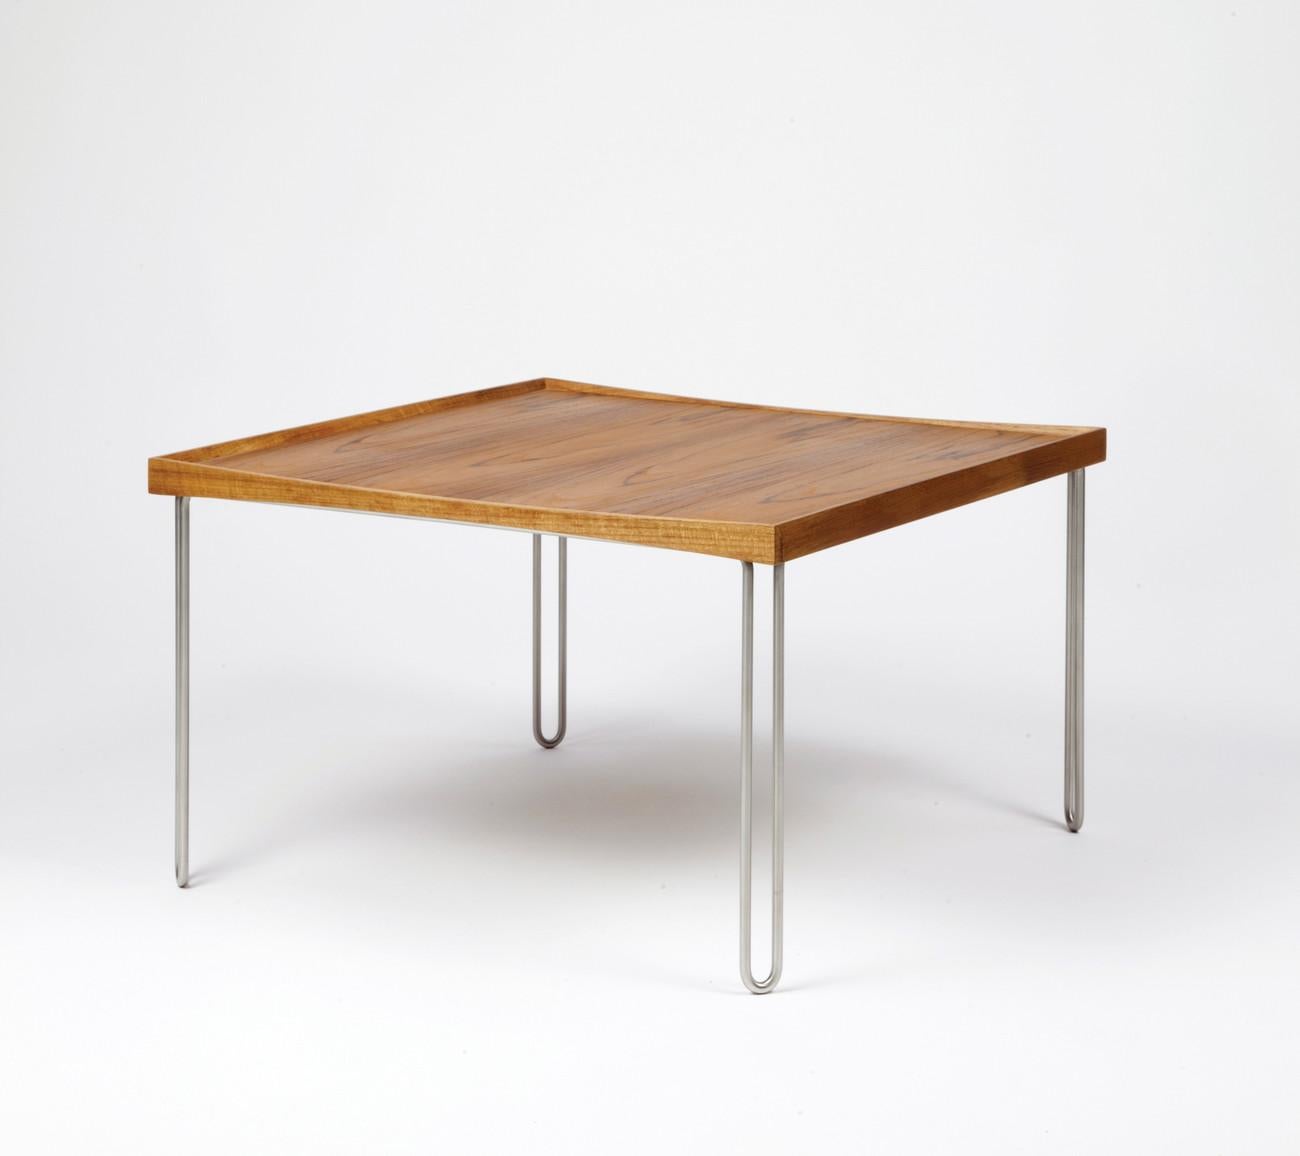 Table designed by Finn Juhl in 1965, relaunched in 2002.
Manufactured by House of Finn Juhl in Denmark.

The tray table, designed by Finn Juhl in 1965, is a further development of his famous Turning Trays, which today are manufactured by